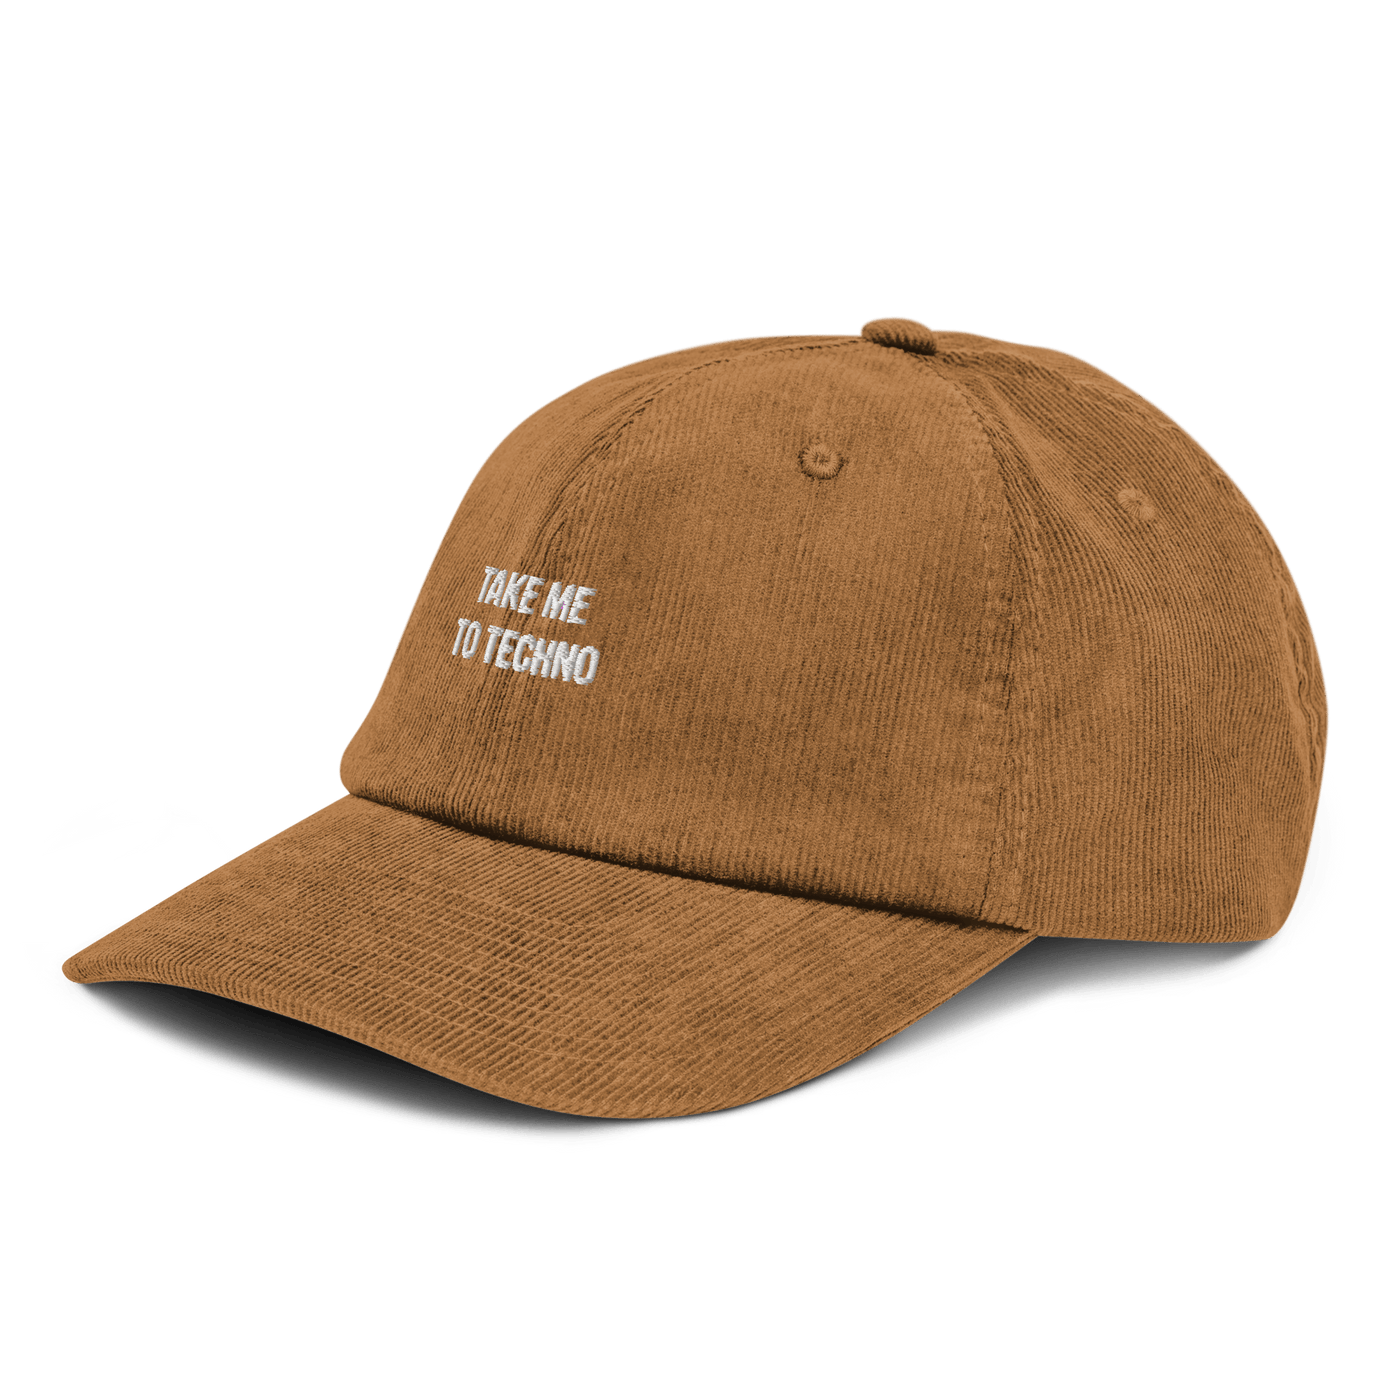 Take me to techno Corduroy hat - Camel - - Just Another Cap Store